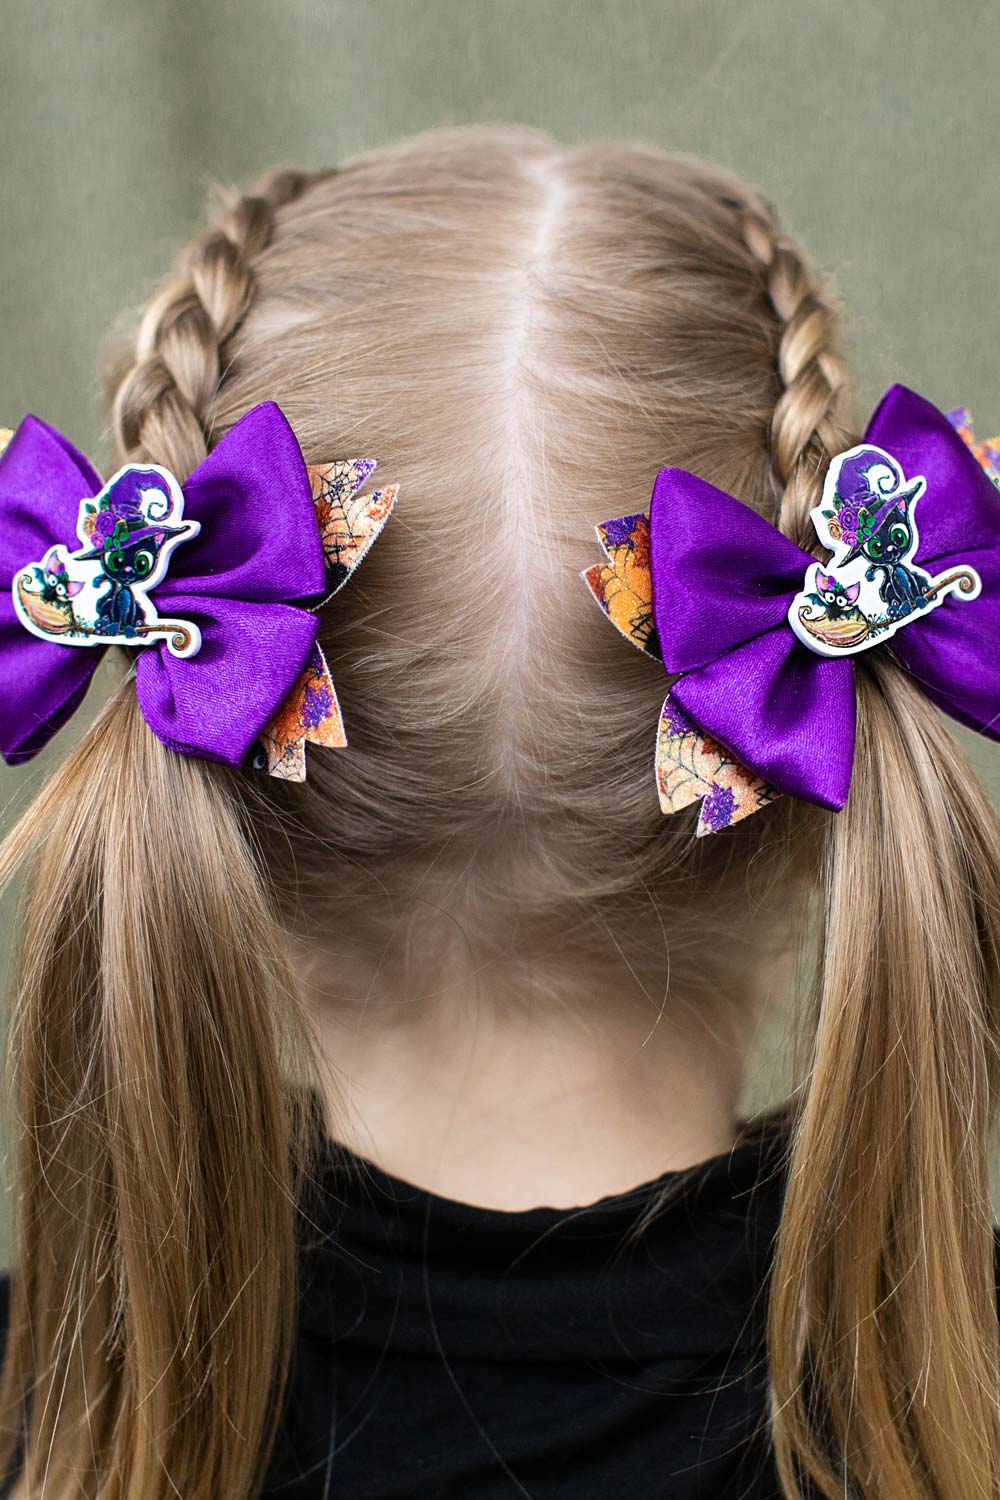 Hairstyles For Girls with Halloween Accessories